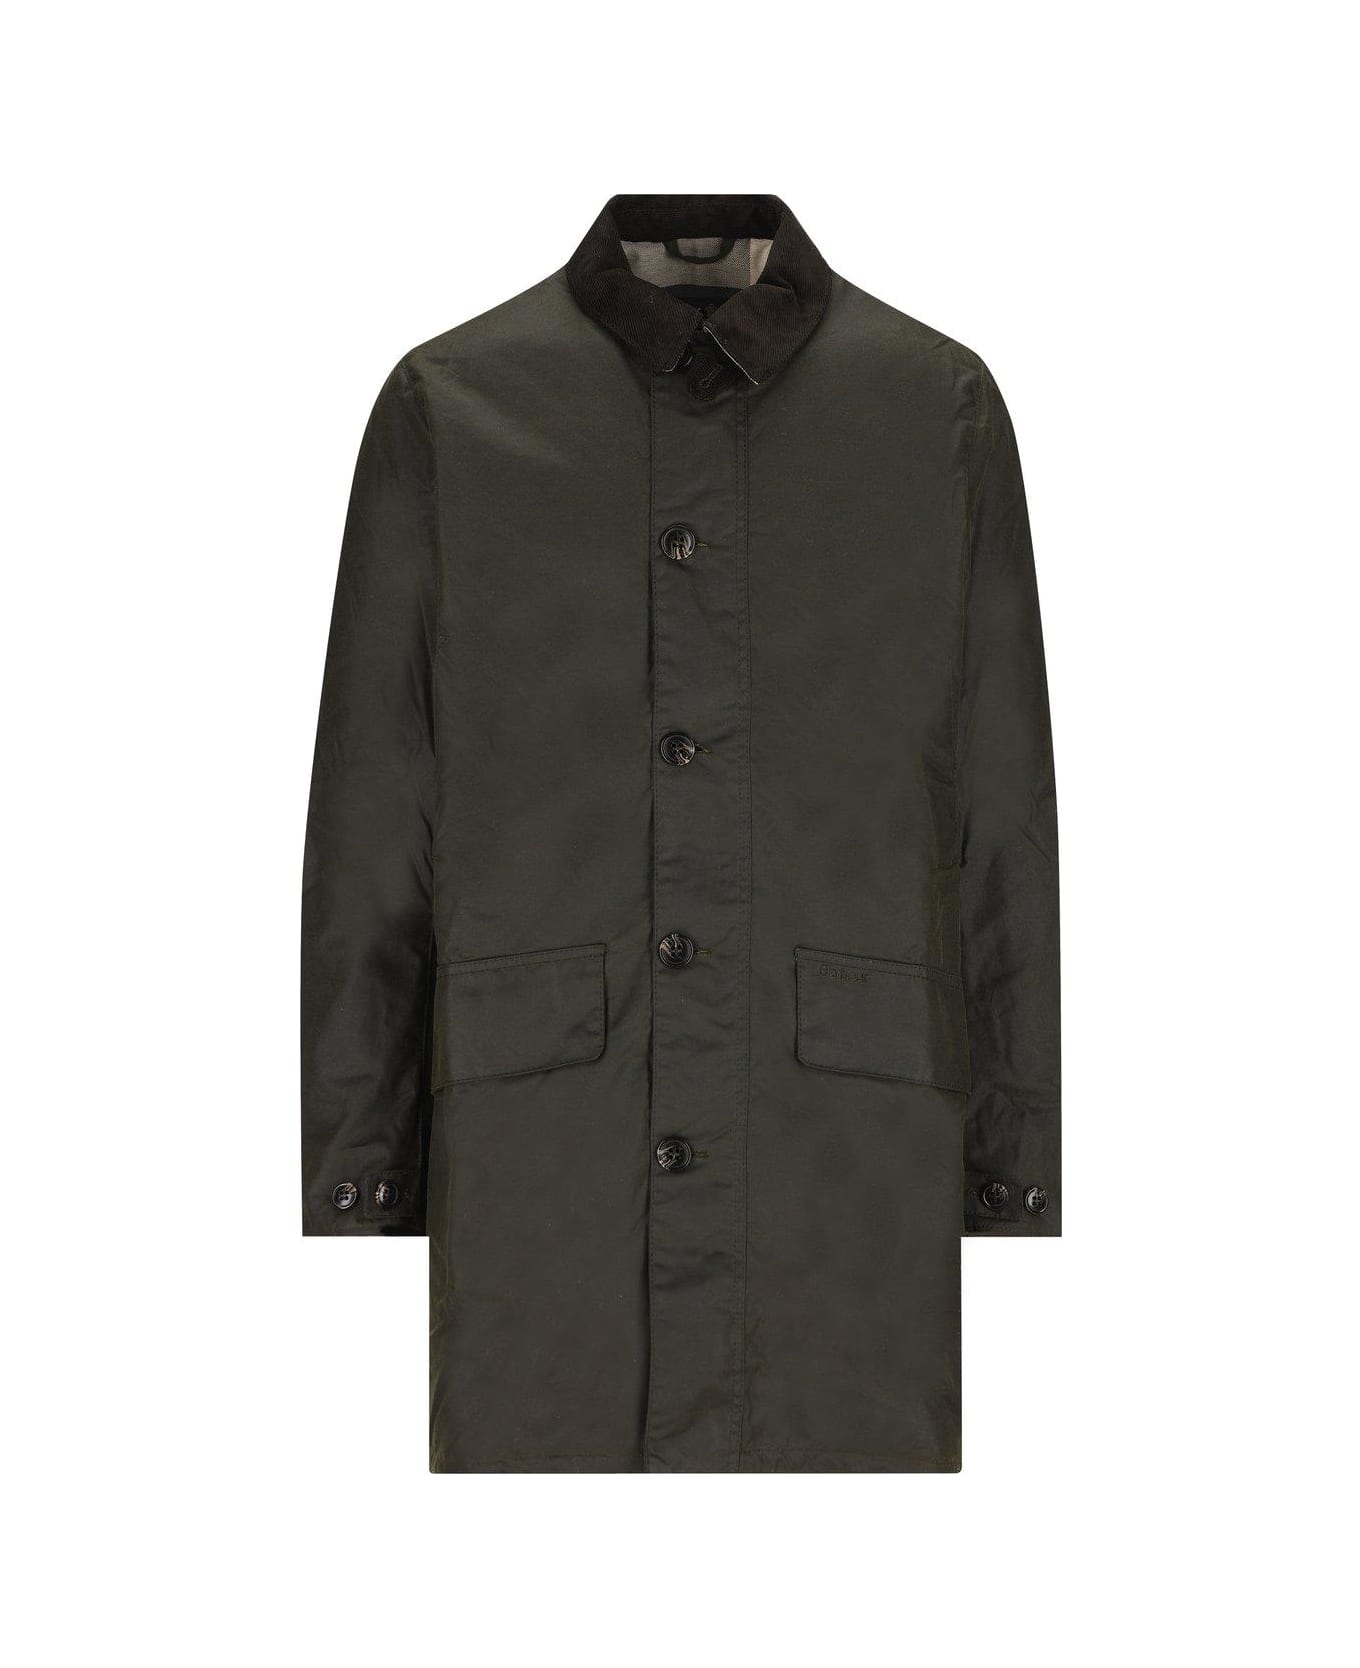 Barbour Buttoned Long-sleeved Jacket - Green コート